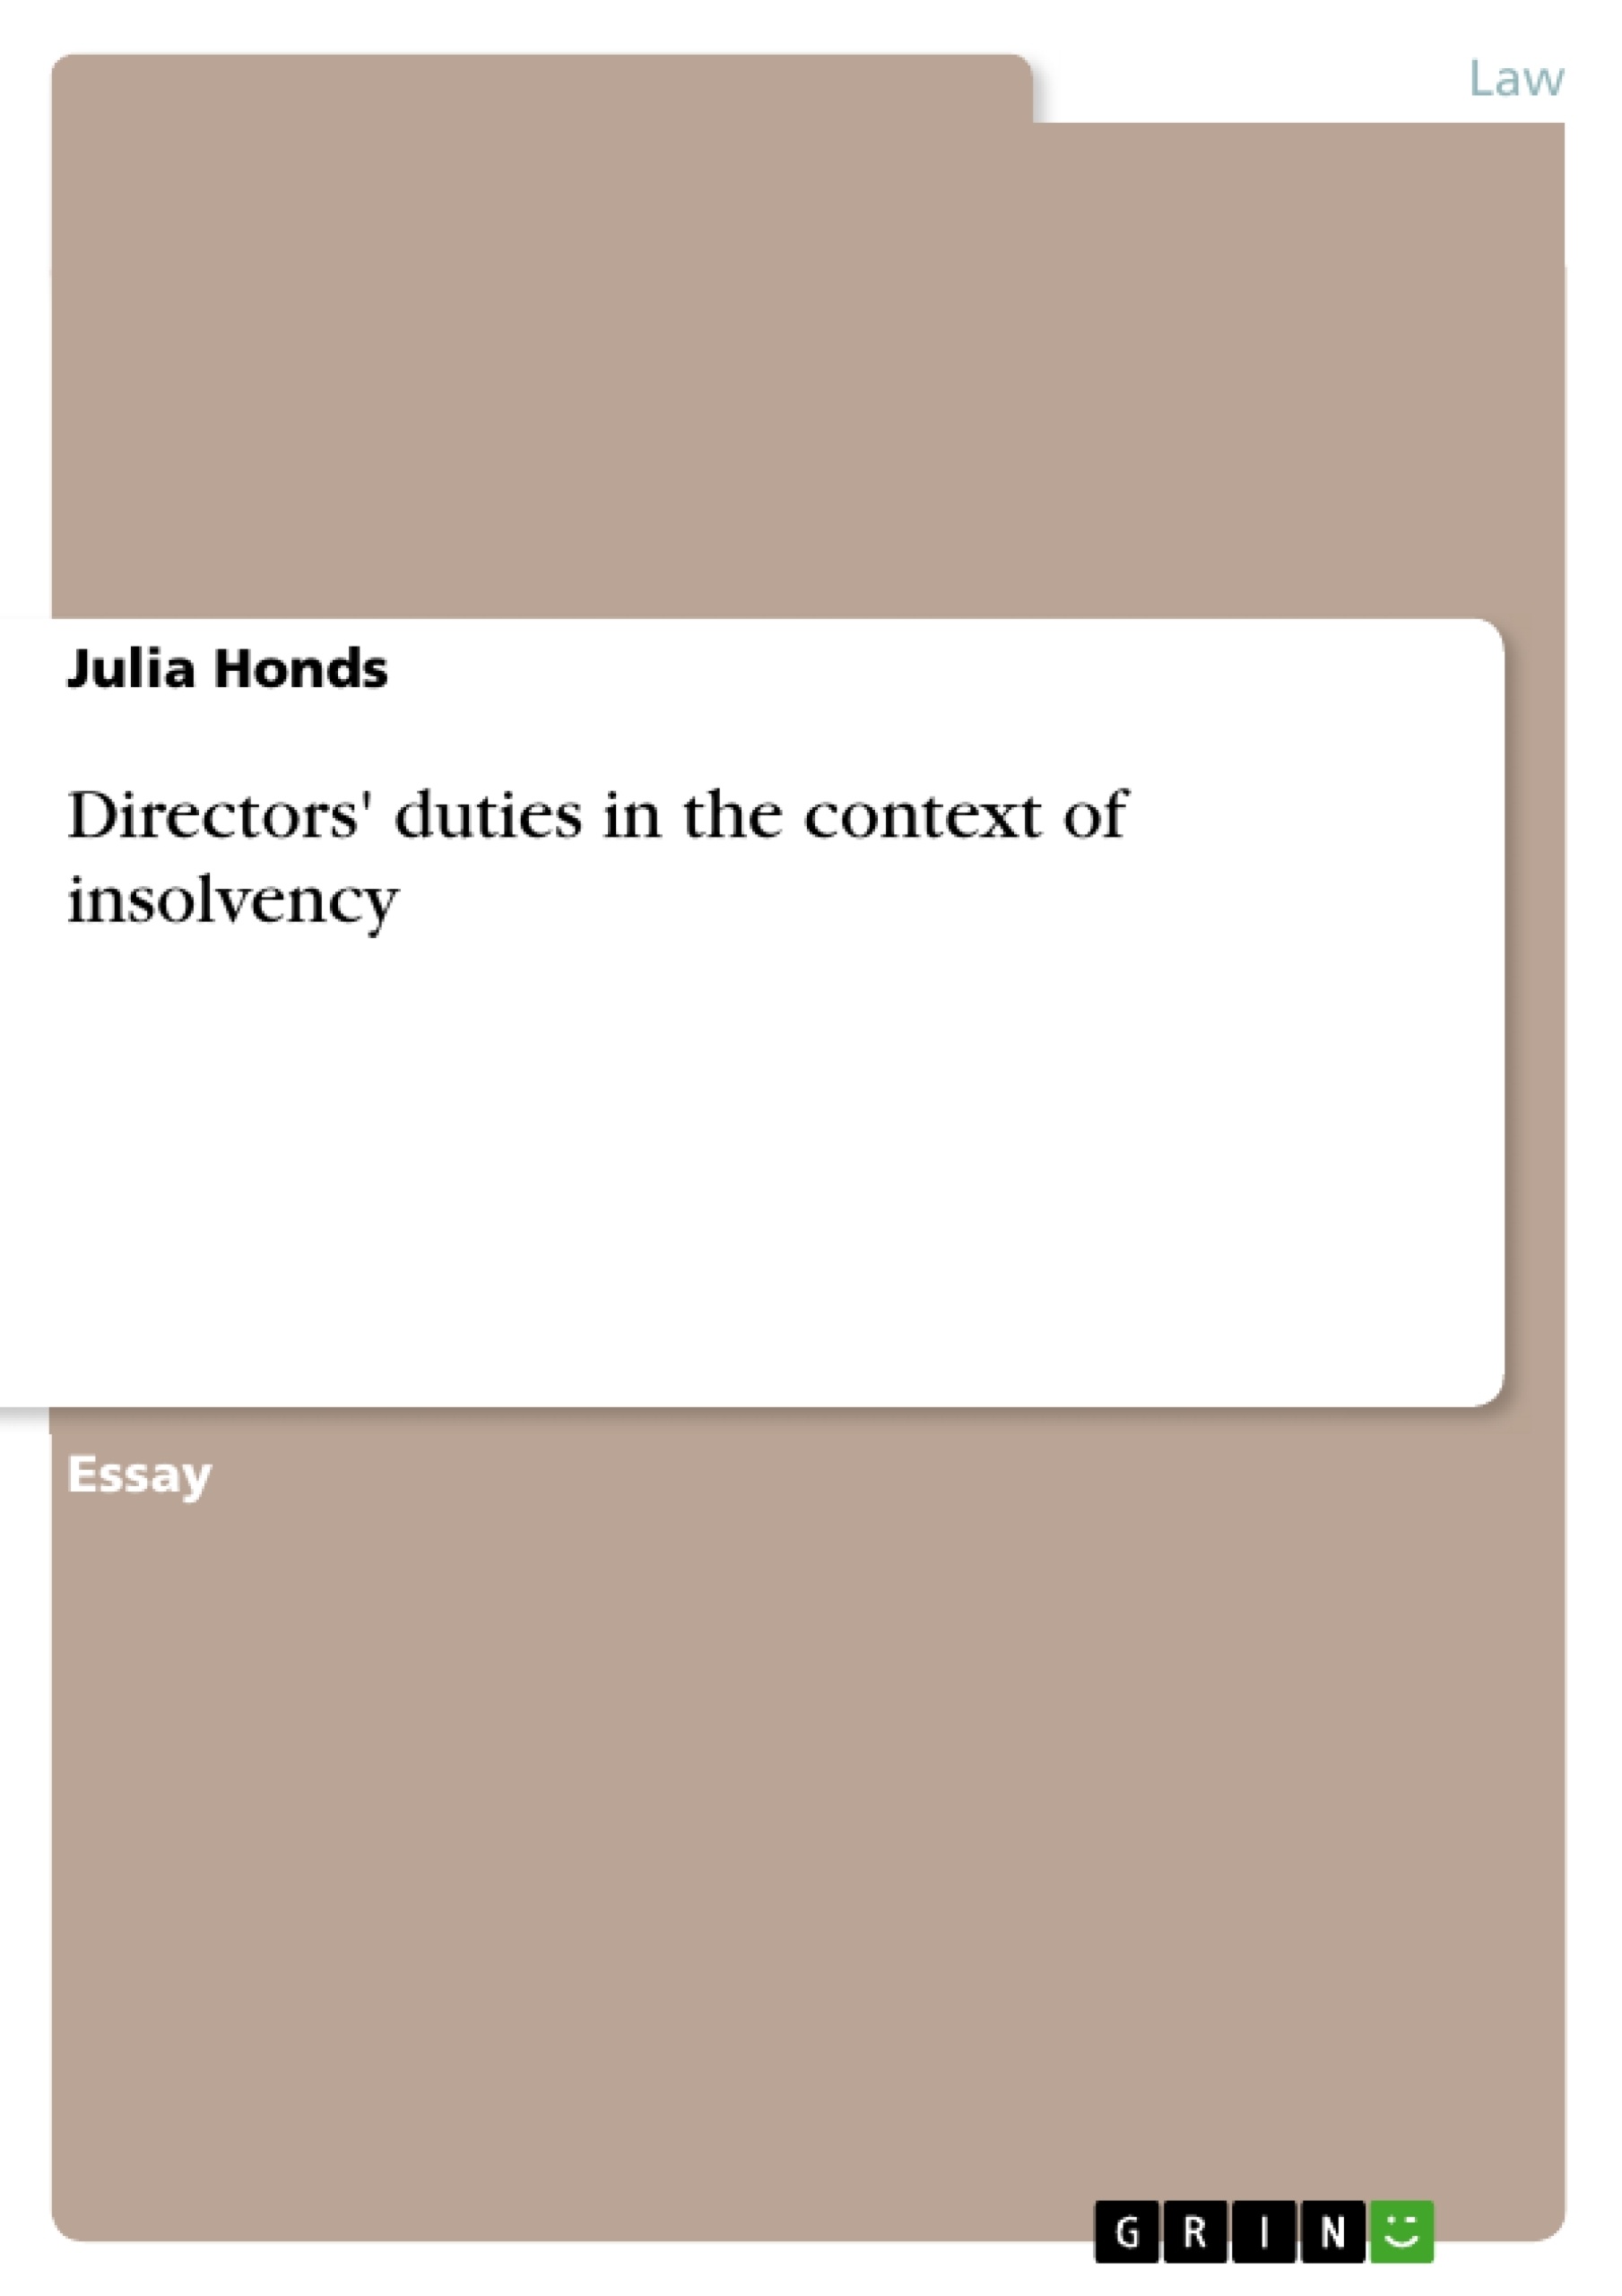 Title: Directors' duties in the context of insolvency